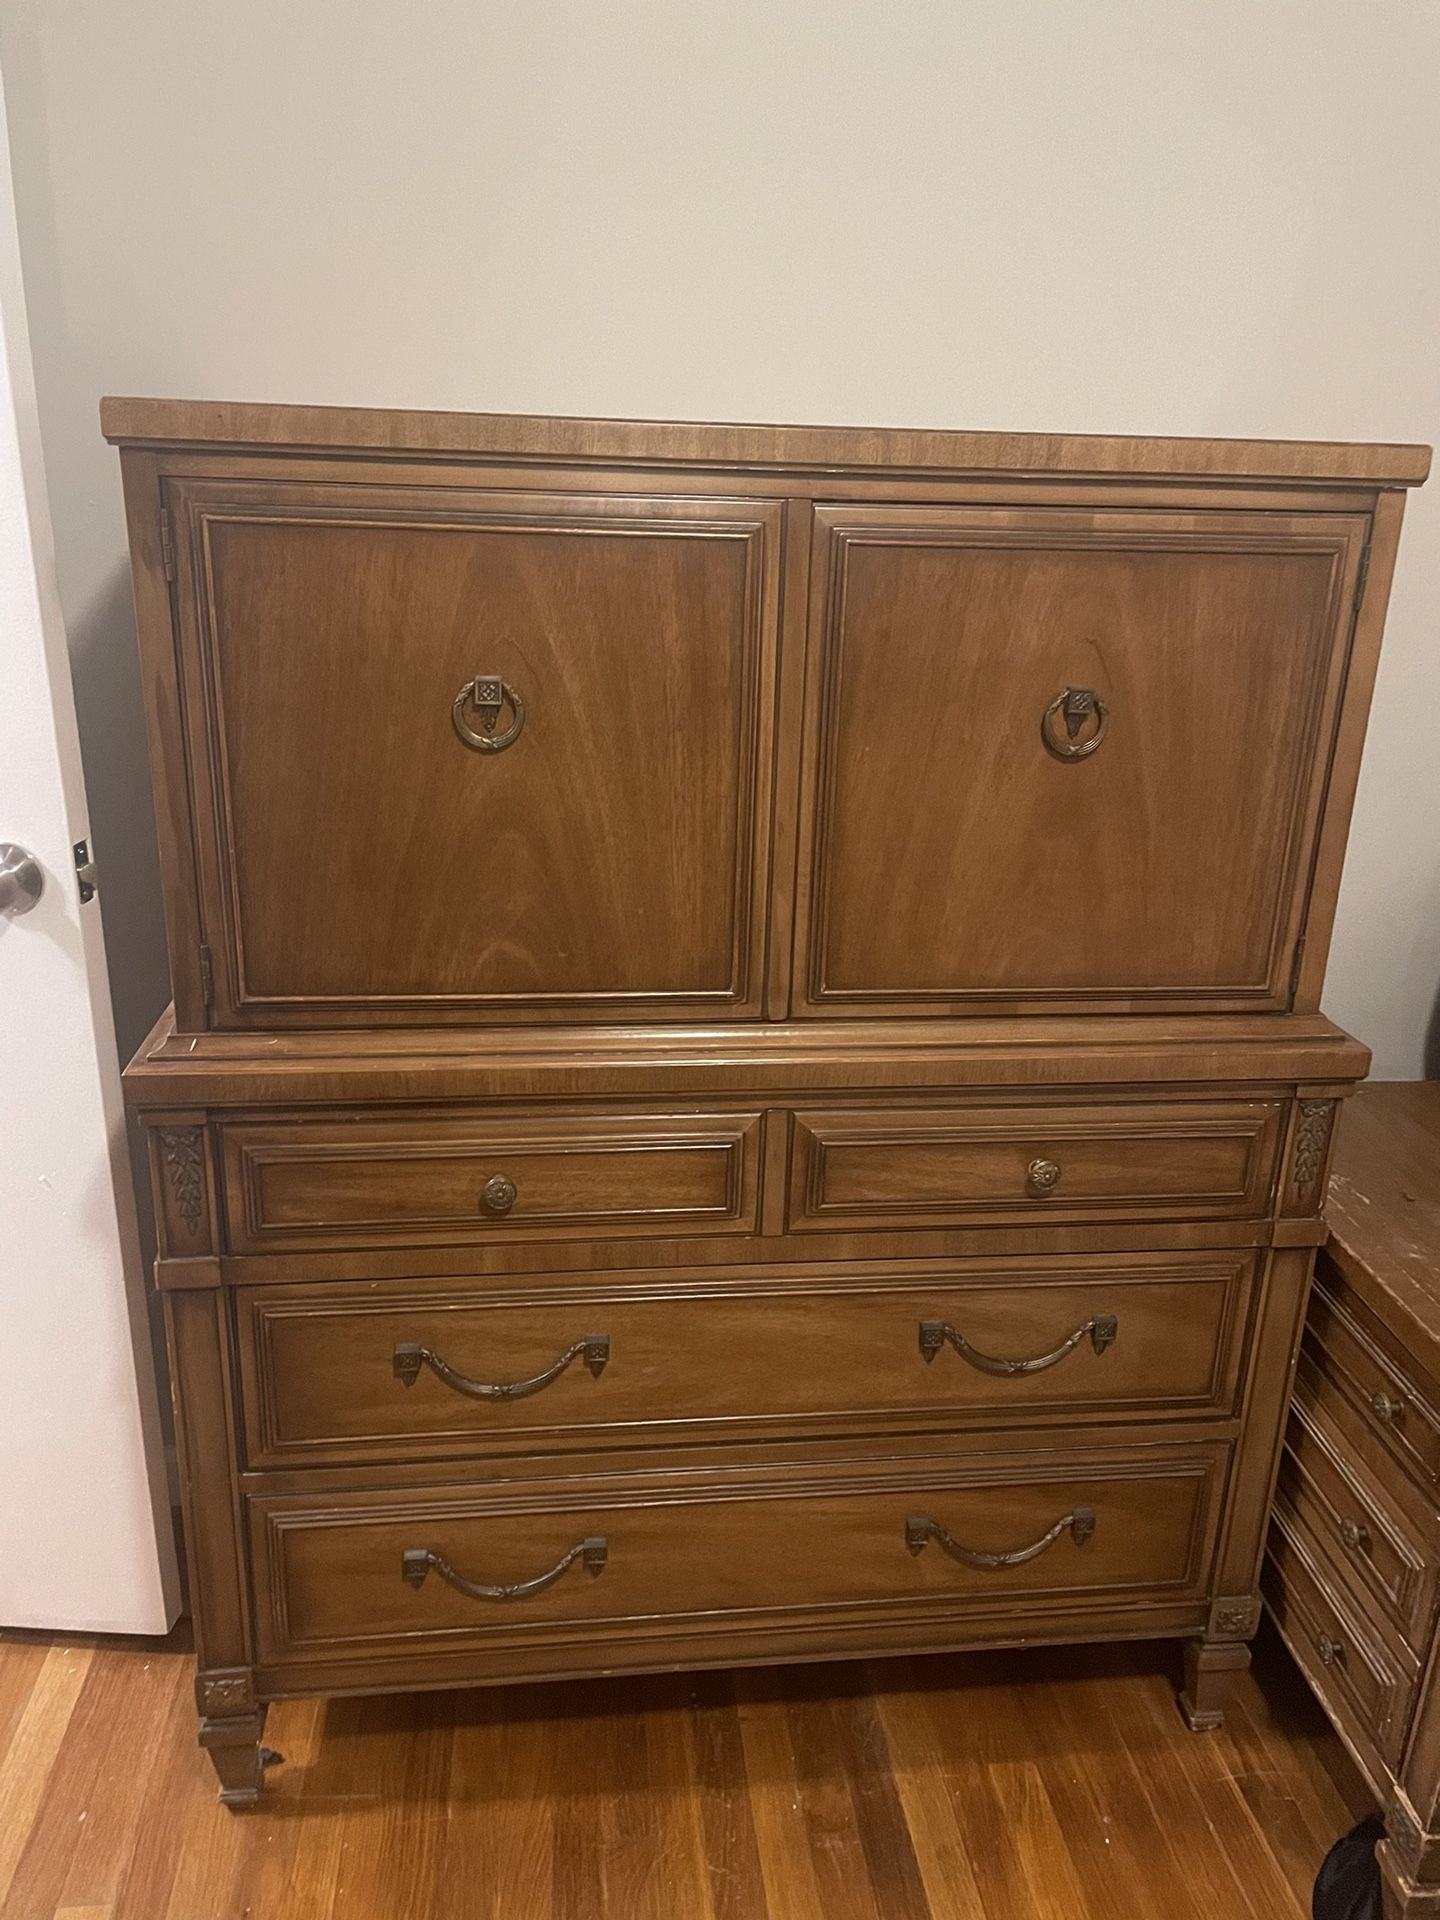 Antique Chest Of Drawers/Armoire for Personal Items